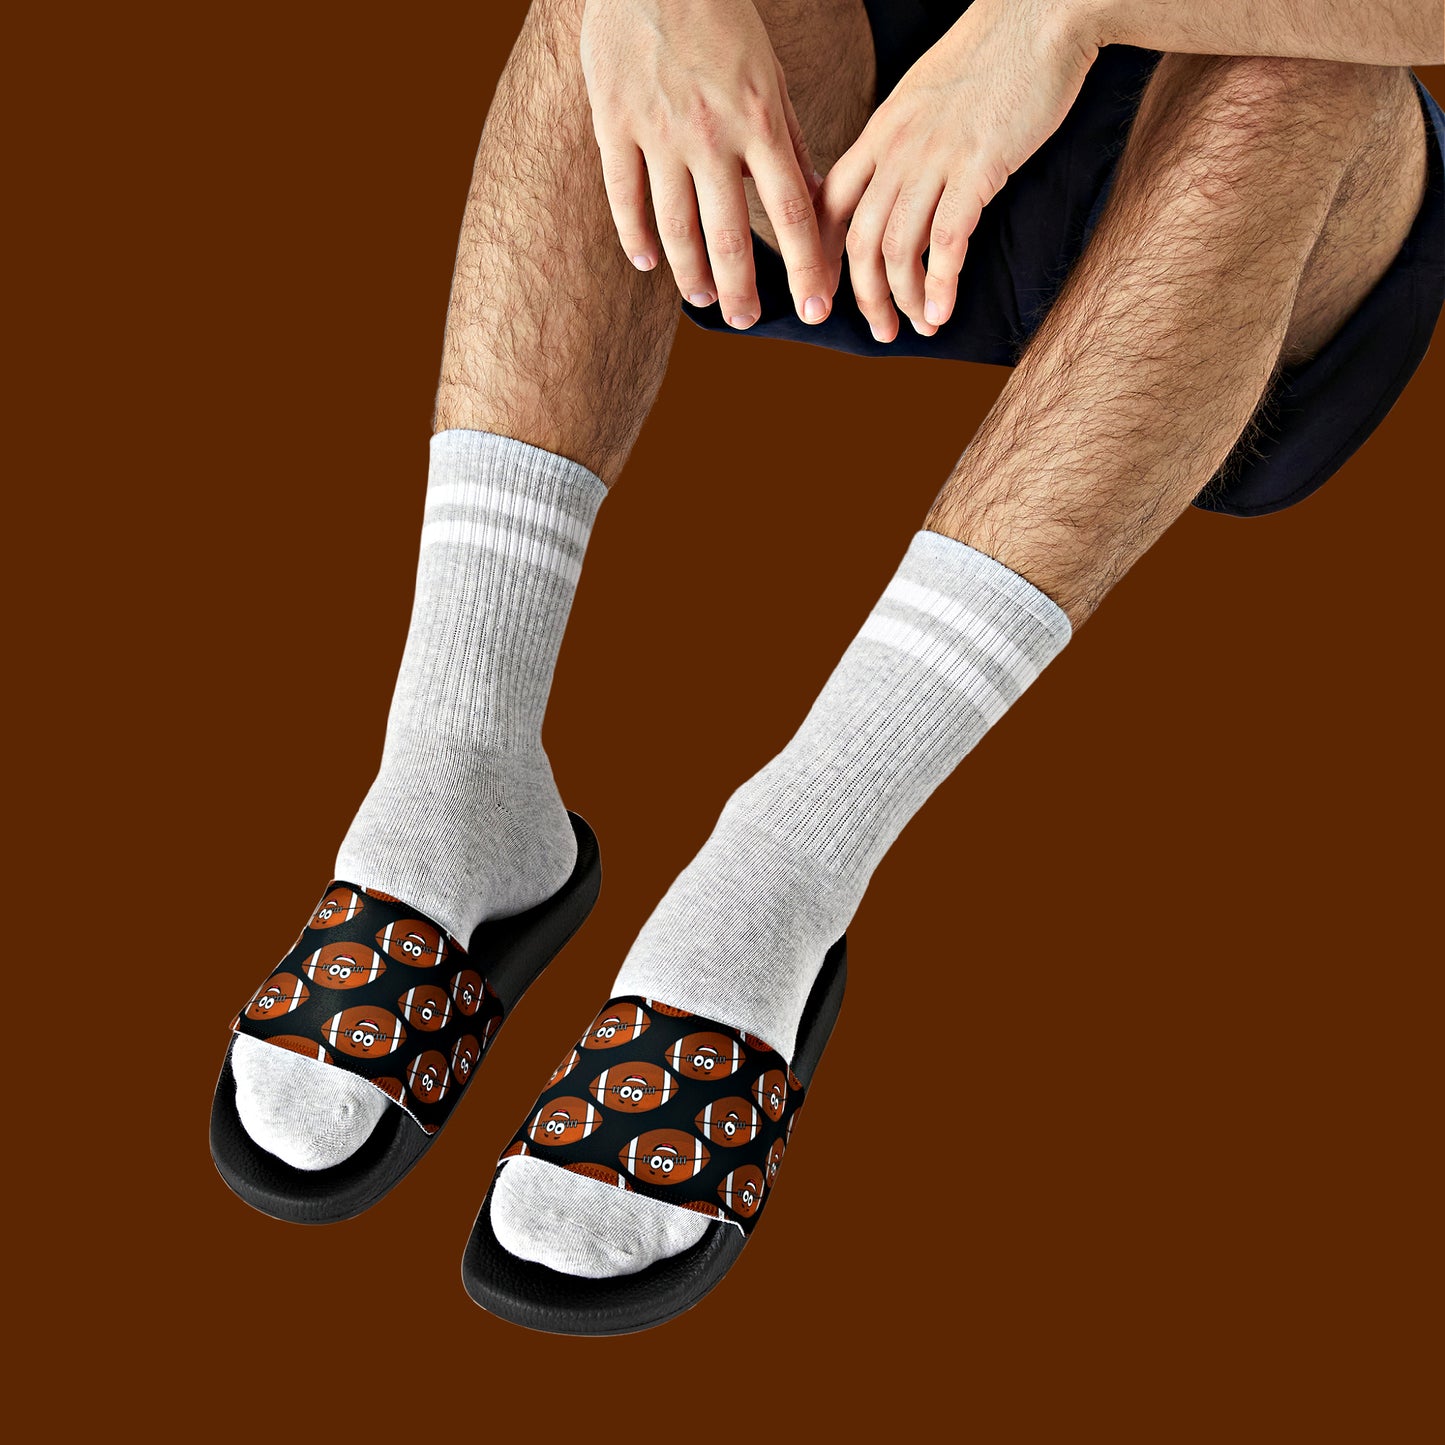 Mock up of a man wearing white socks and our sandals